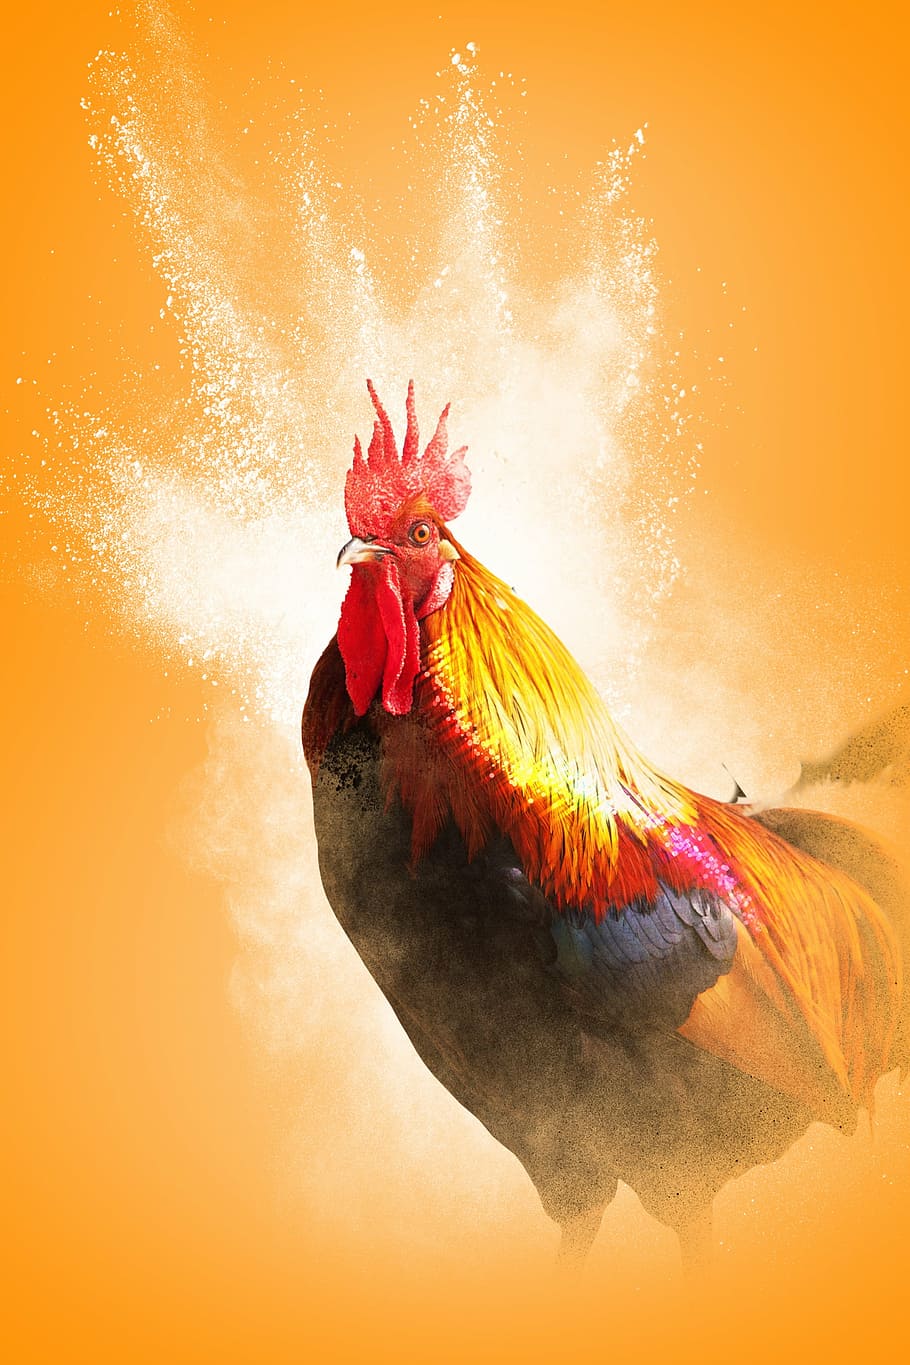 HD wallpaper red and yellow rooster wallpaper cock year of the rooster  bird  Wallpaper Flare